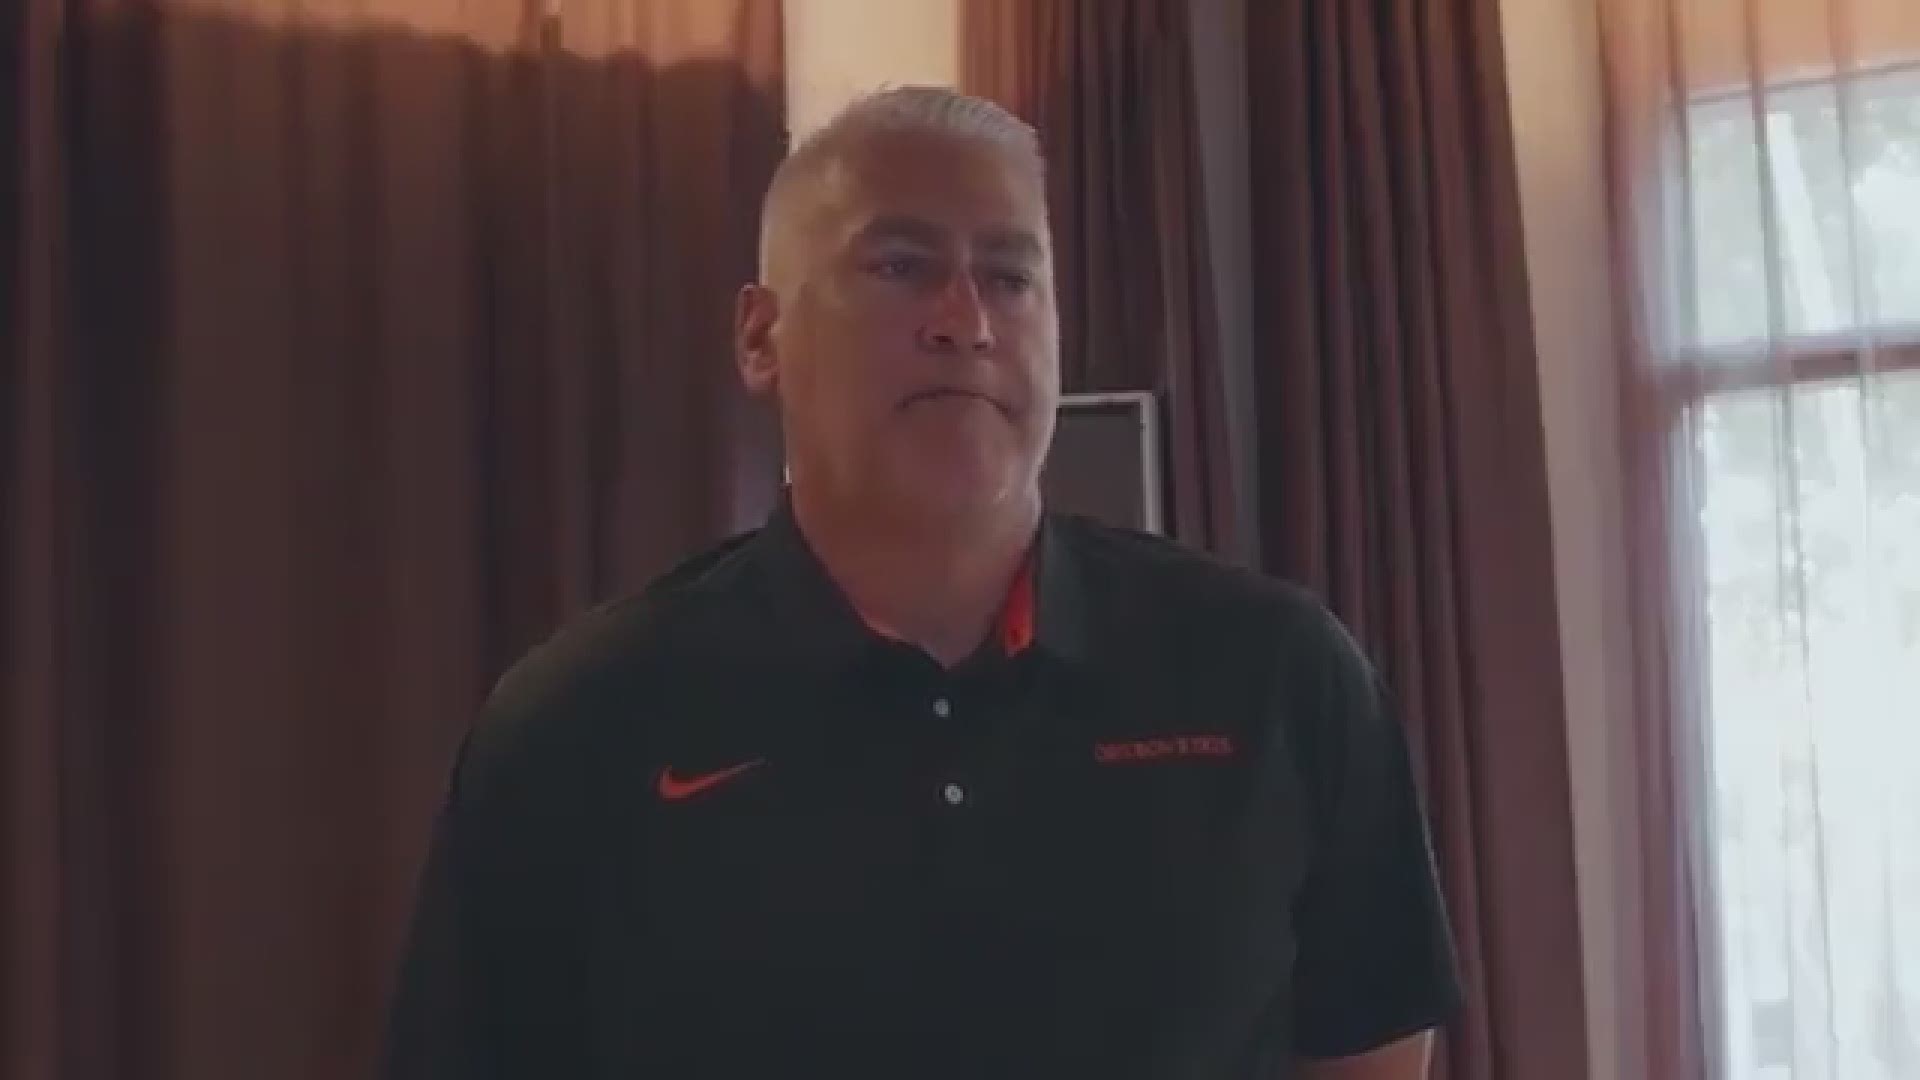 OSU basketball coach Wayne Tinkle says team is fine after Barcelona attack. The Beavers were in Barcelona for a tournament.